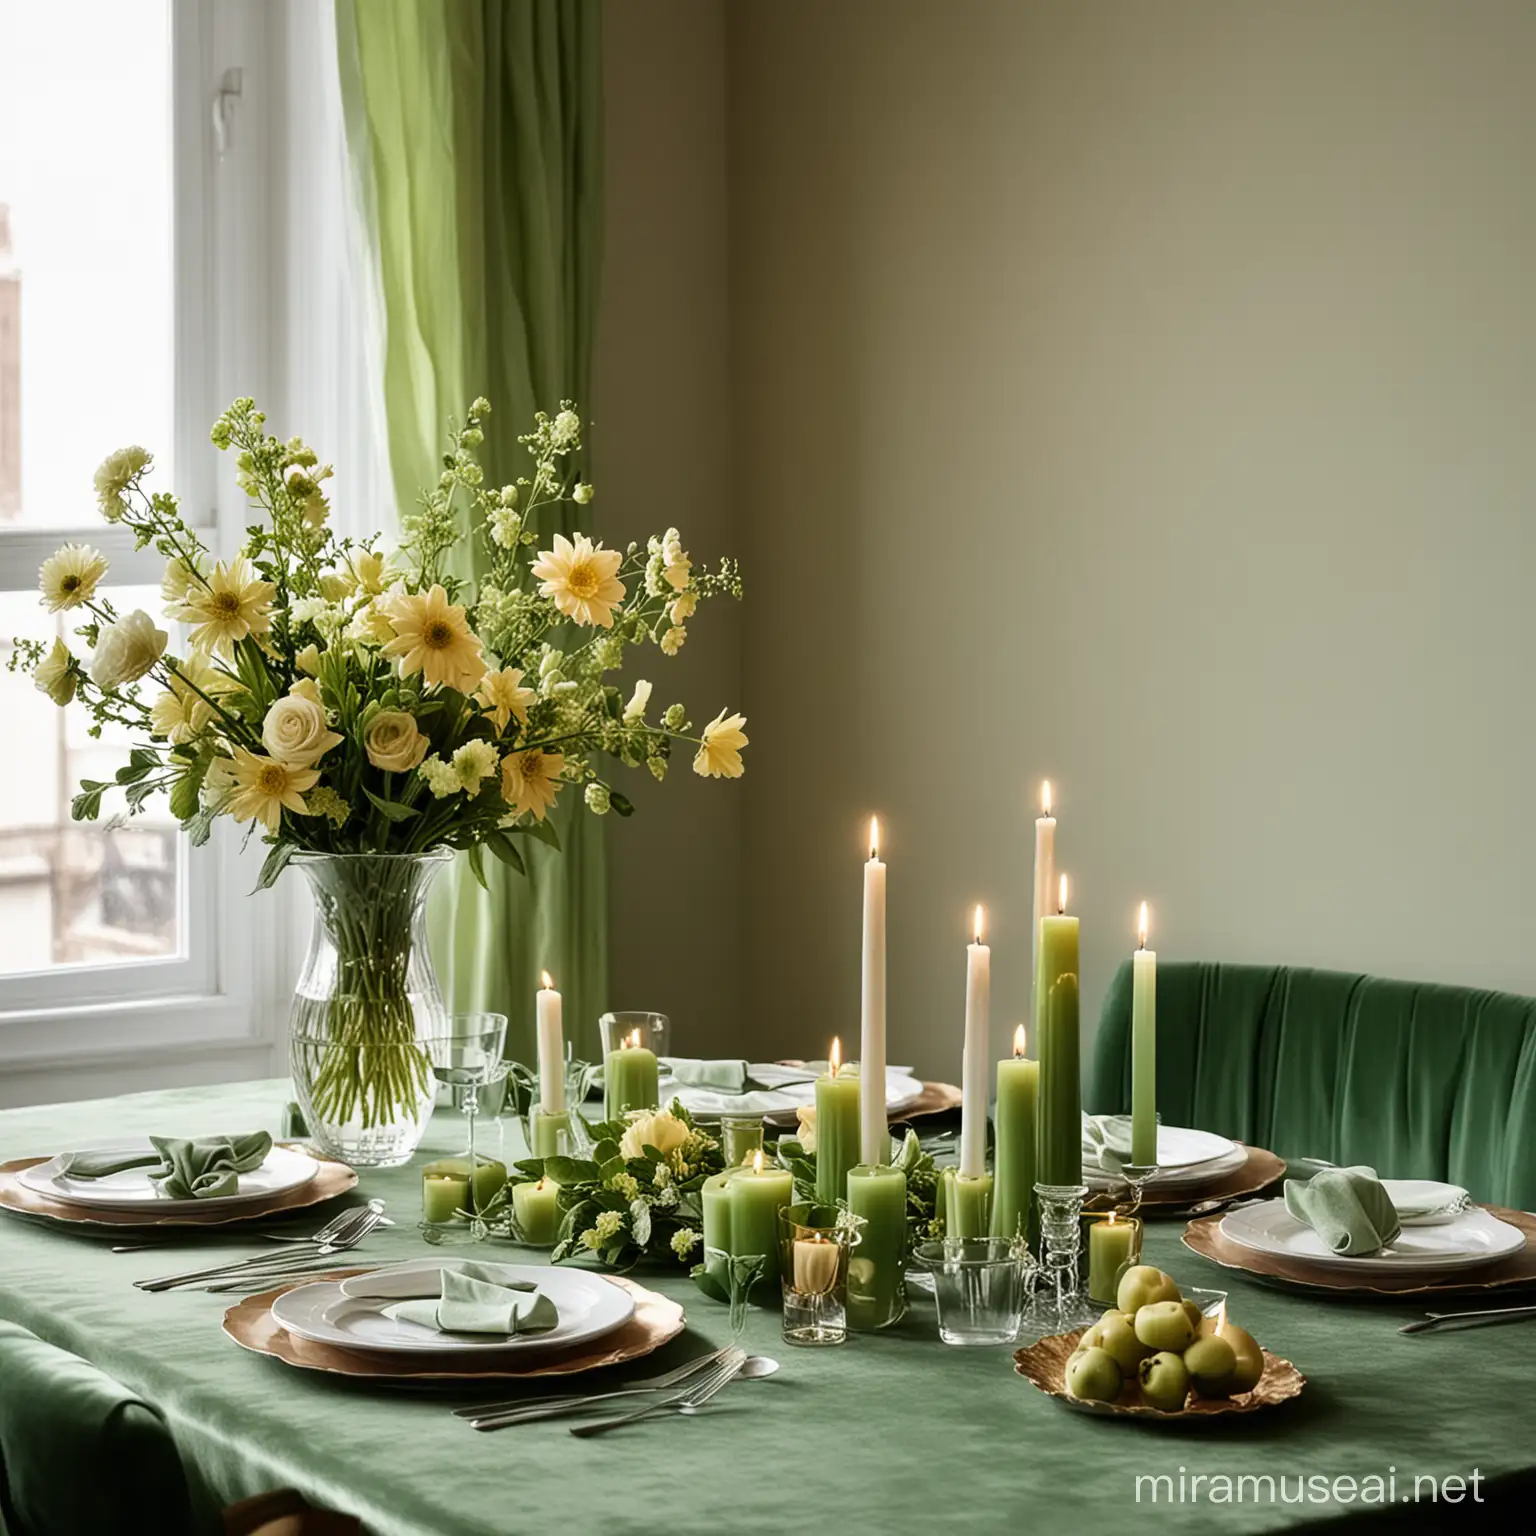 Interior design
Lunch room
Sun shine
Green set
Candles and flowers
Green Velvet
Nude colors

